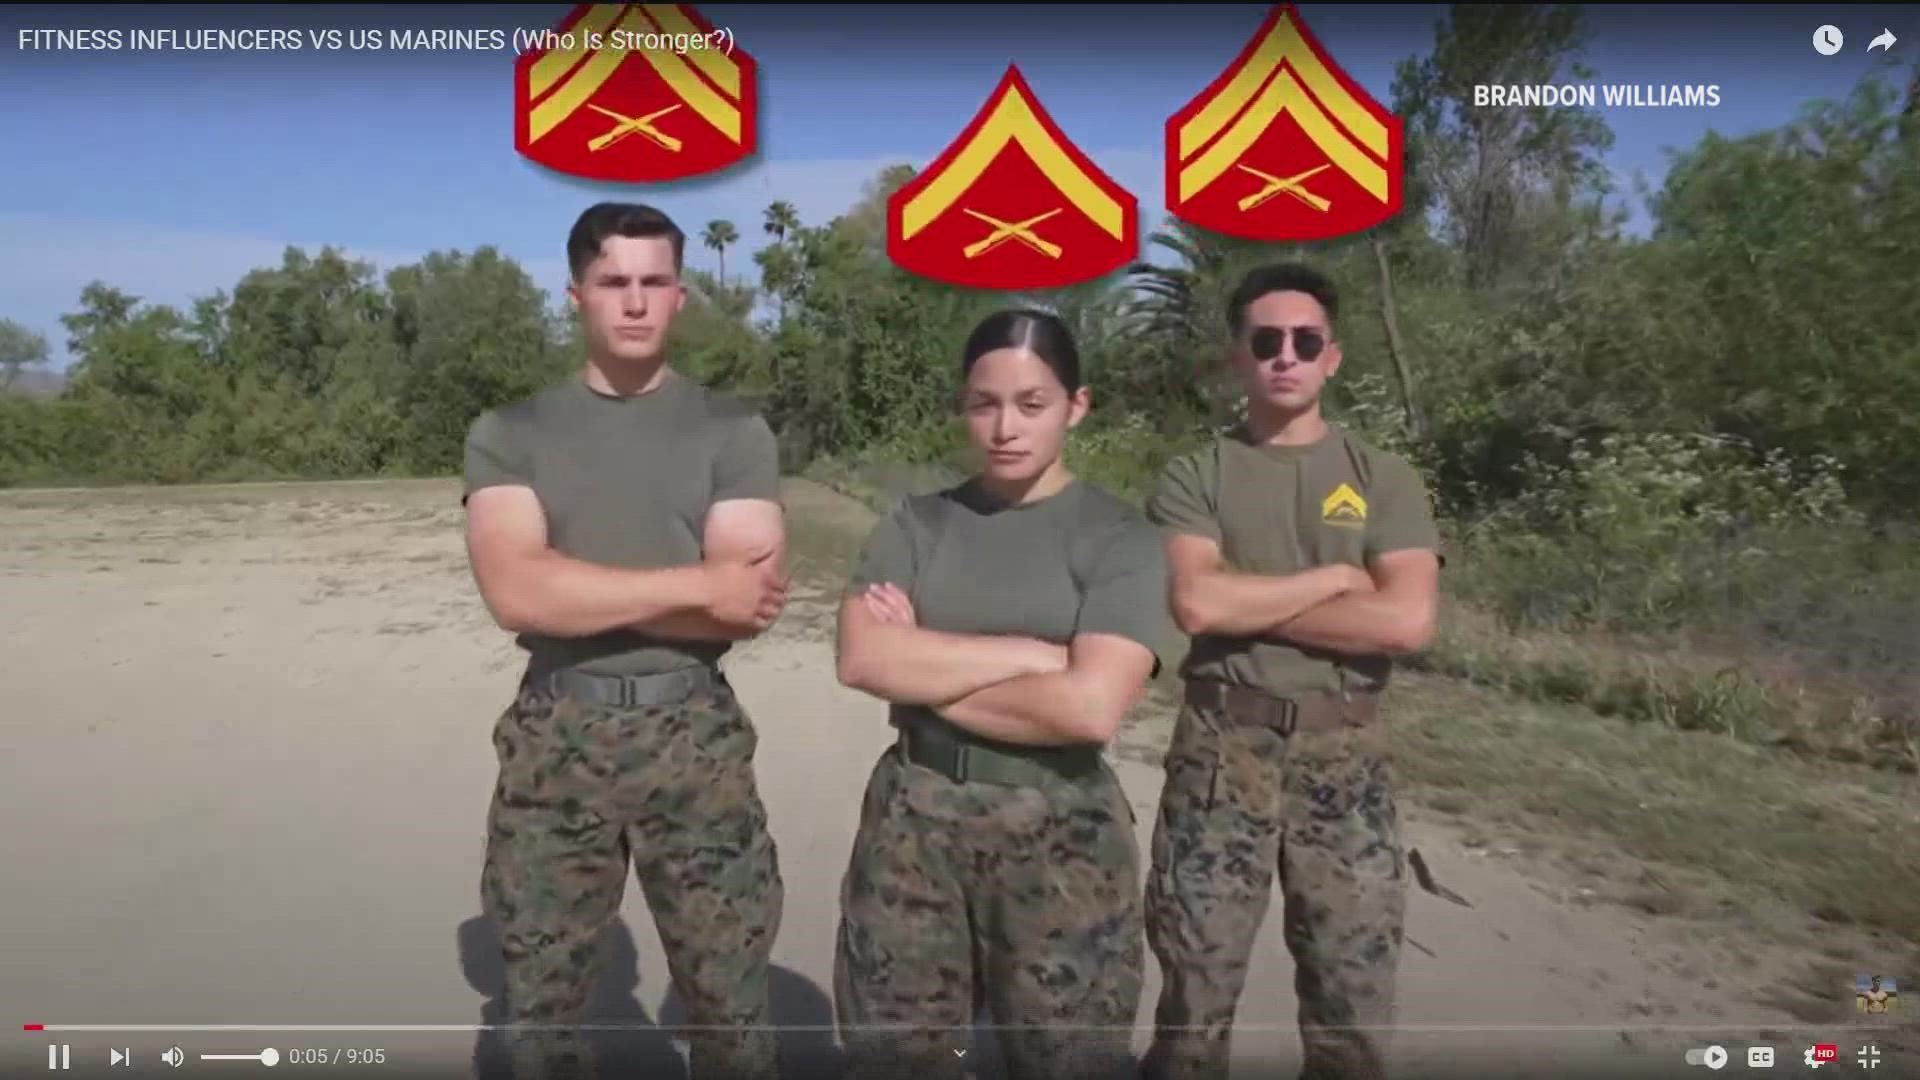 The U.S. Marine Corps only entertainment unit is at Camp Pendleton. Since it started using content creators for branding, they've received 50 million views.